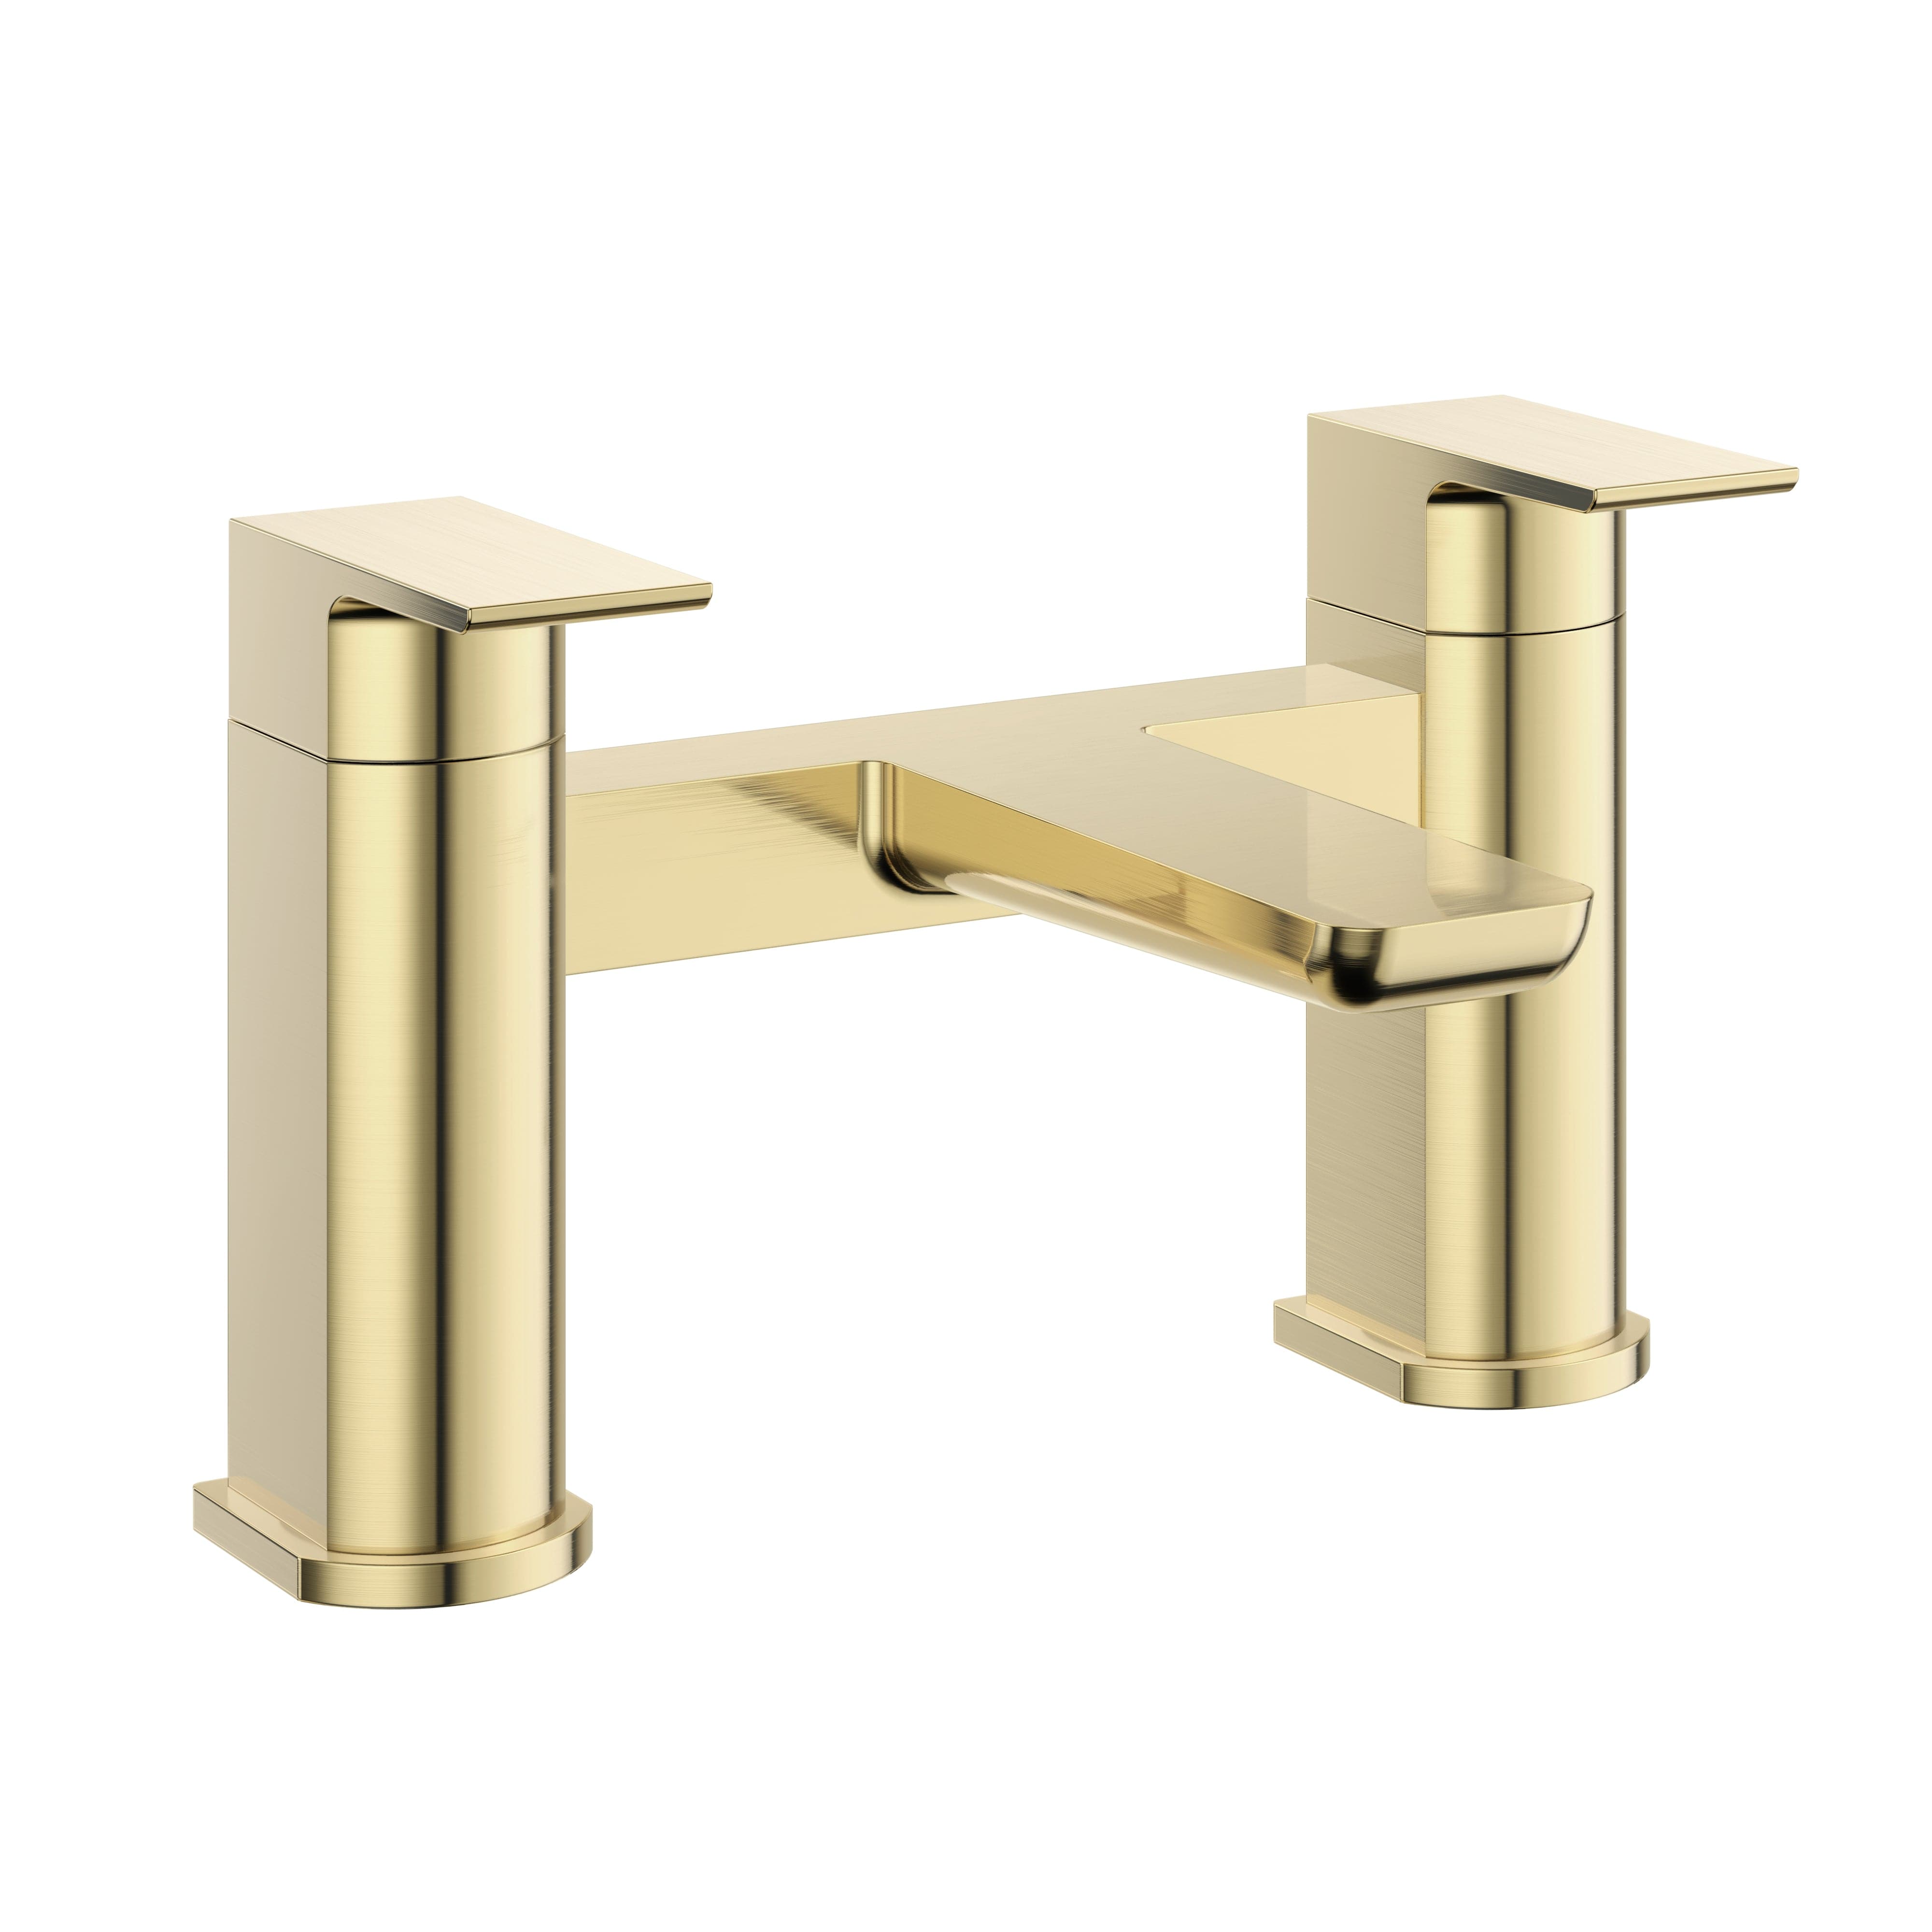 Lunar Soft Square Bath Filler Mixer Tap in Brushed Brass, perfect for modern bathrooms. Stylish and durable bath filler tap, enhancing luxury bathroom design.